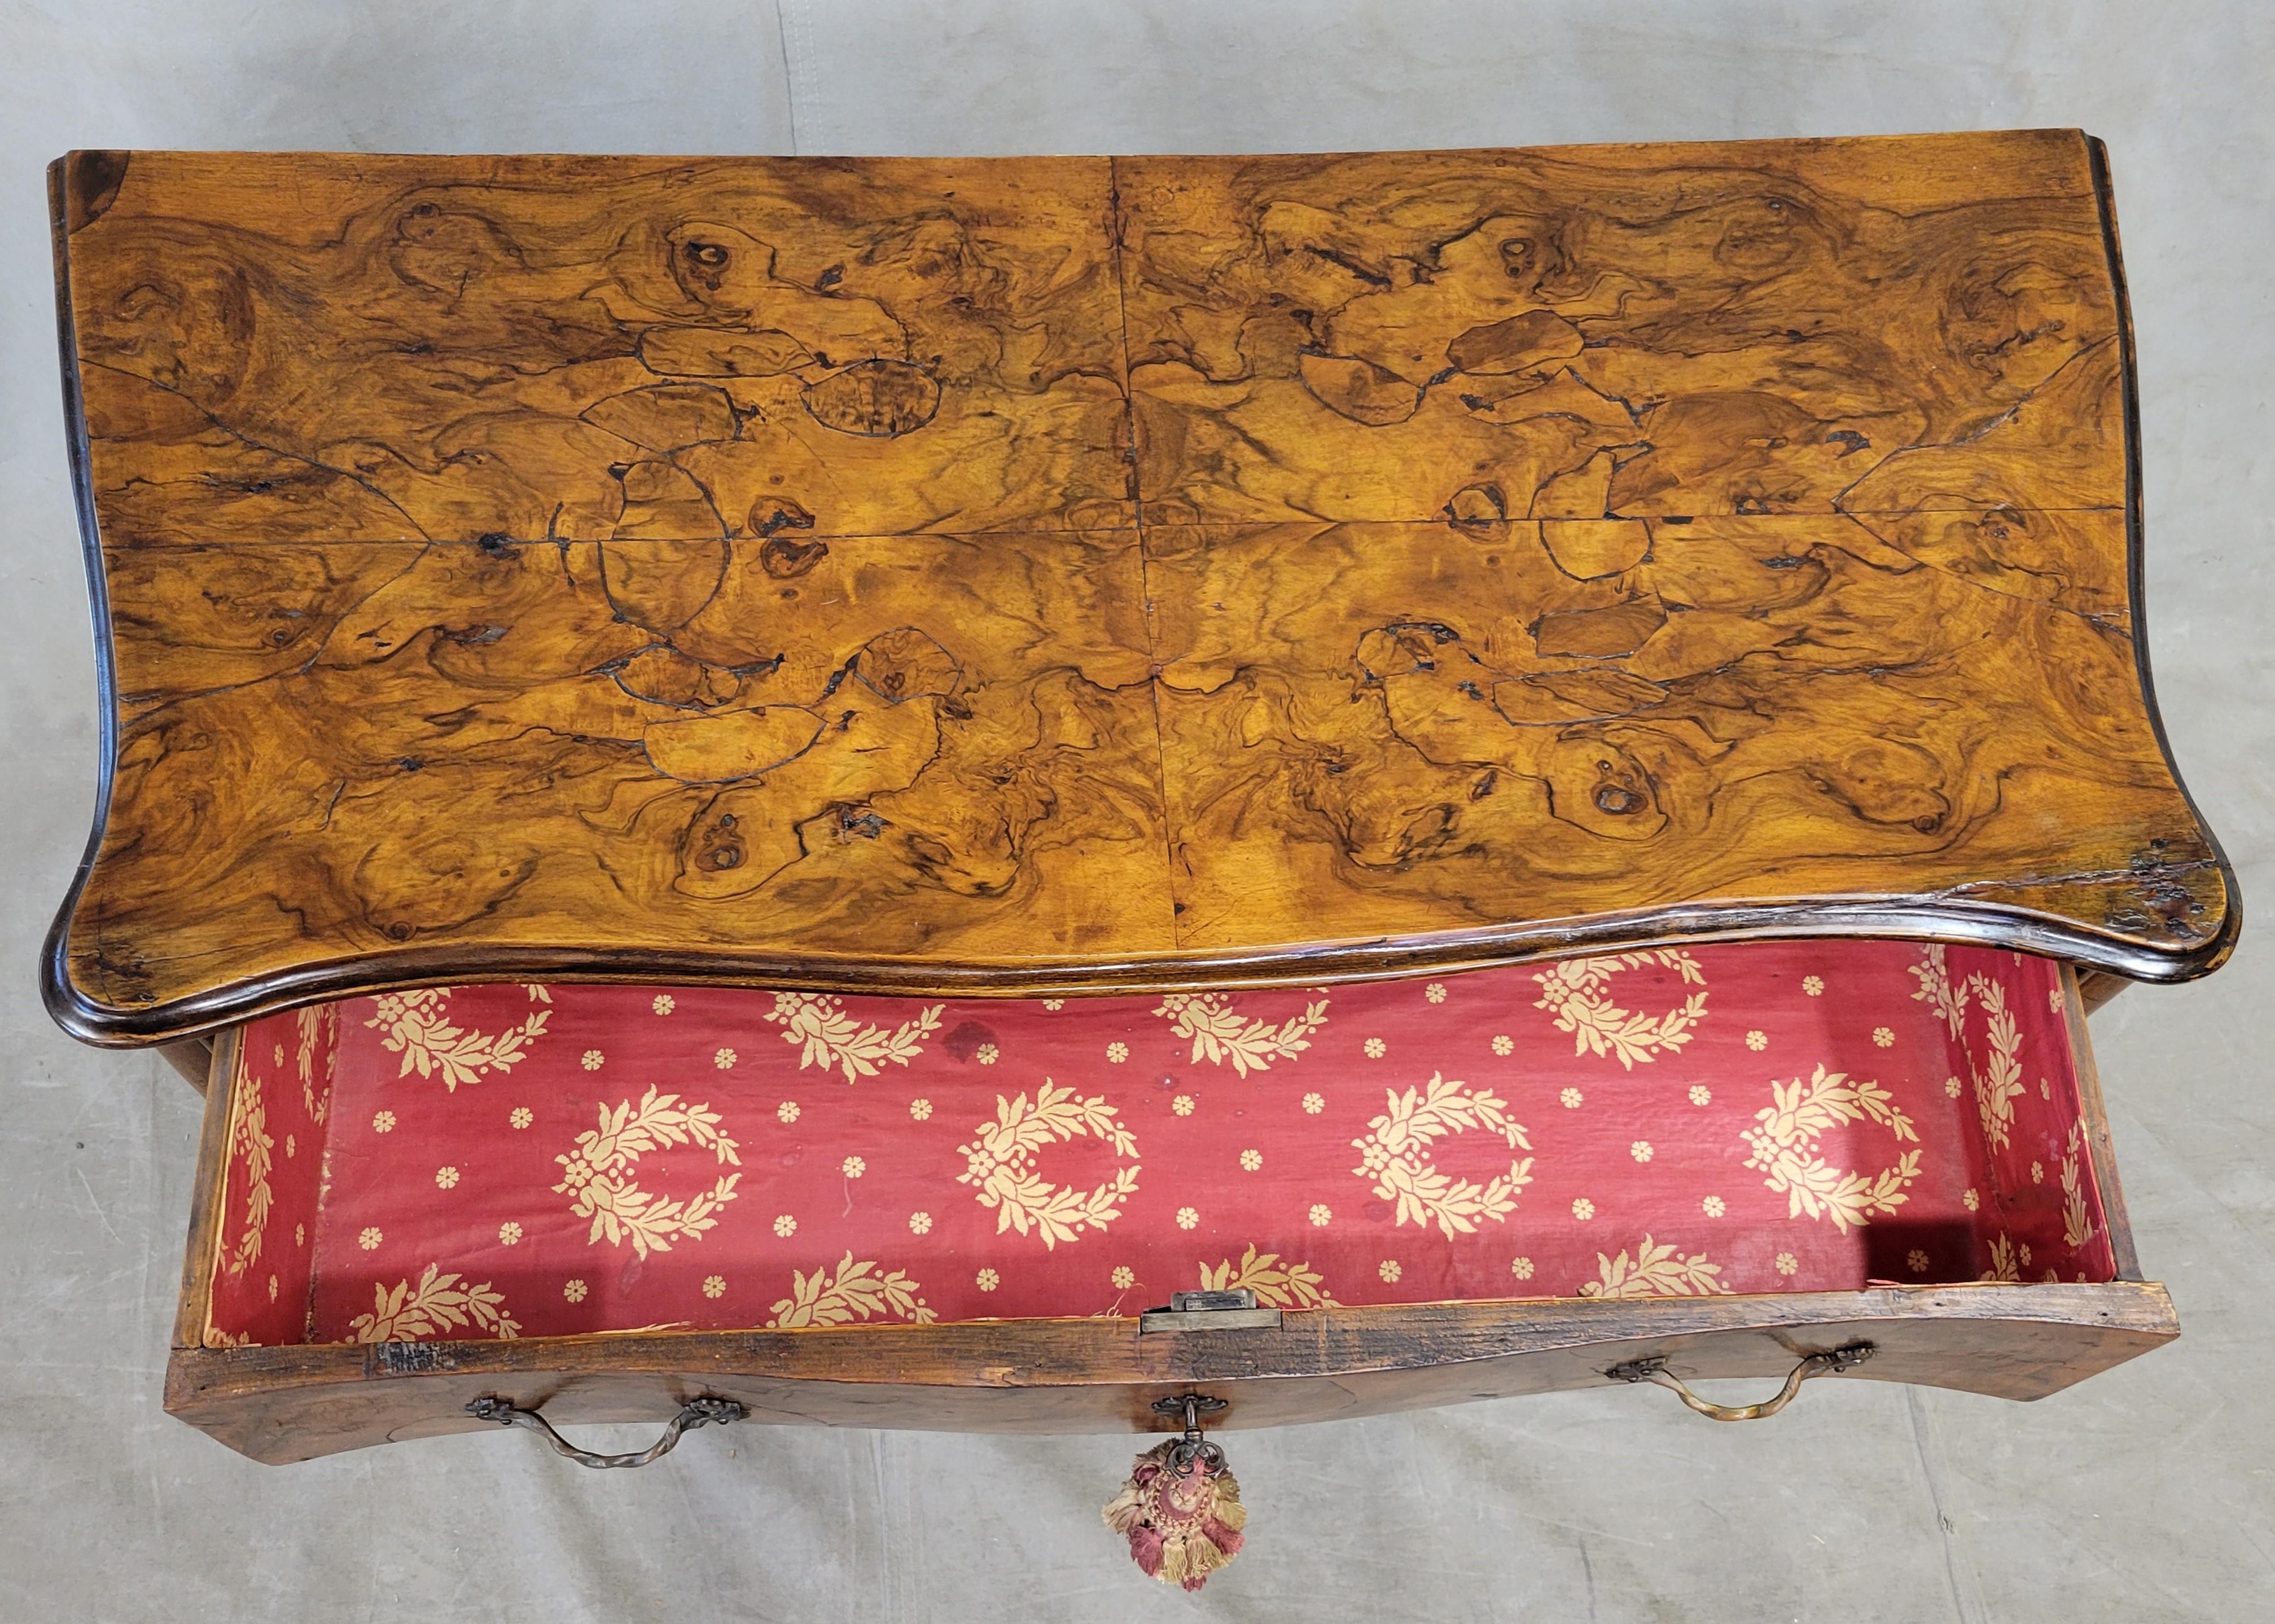 Hand-Crafted Antique Early 1800s French Burl Walnut Commode Sold by B. Altman & Co. New York